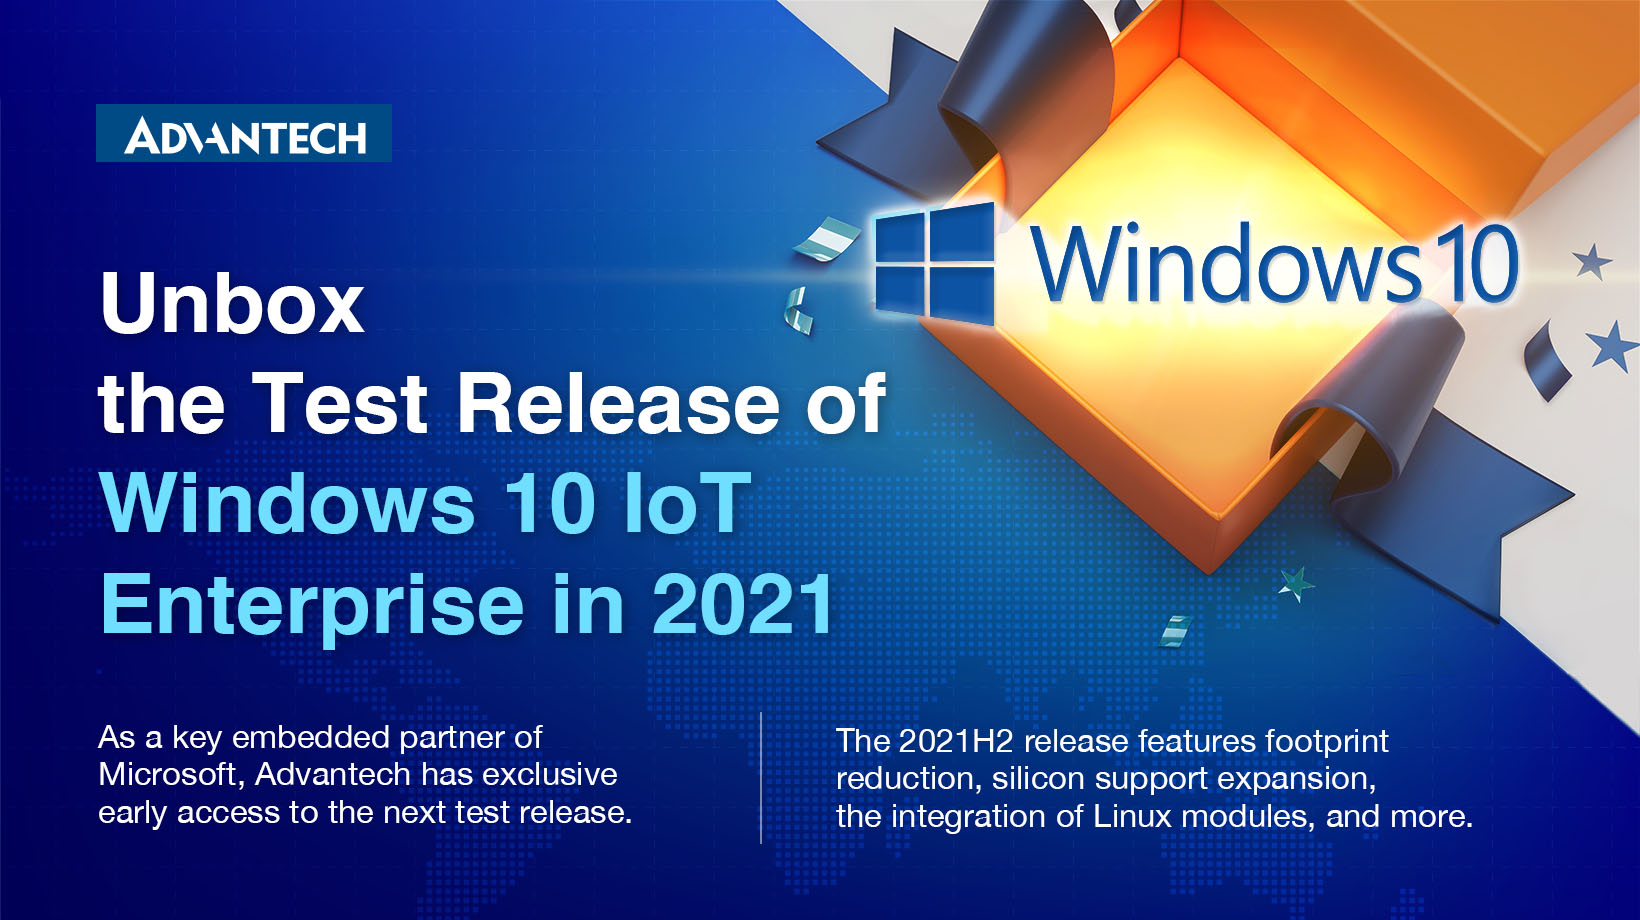 Advantech receives early access to next release of Windows 10